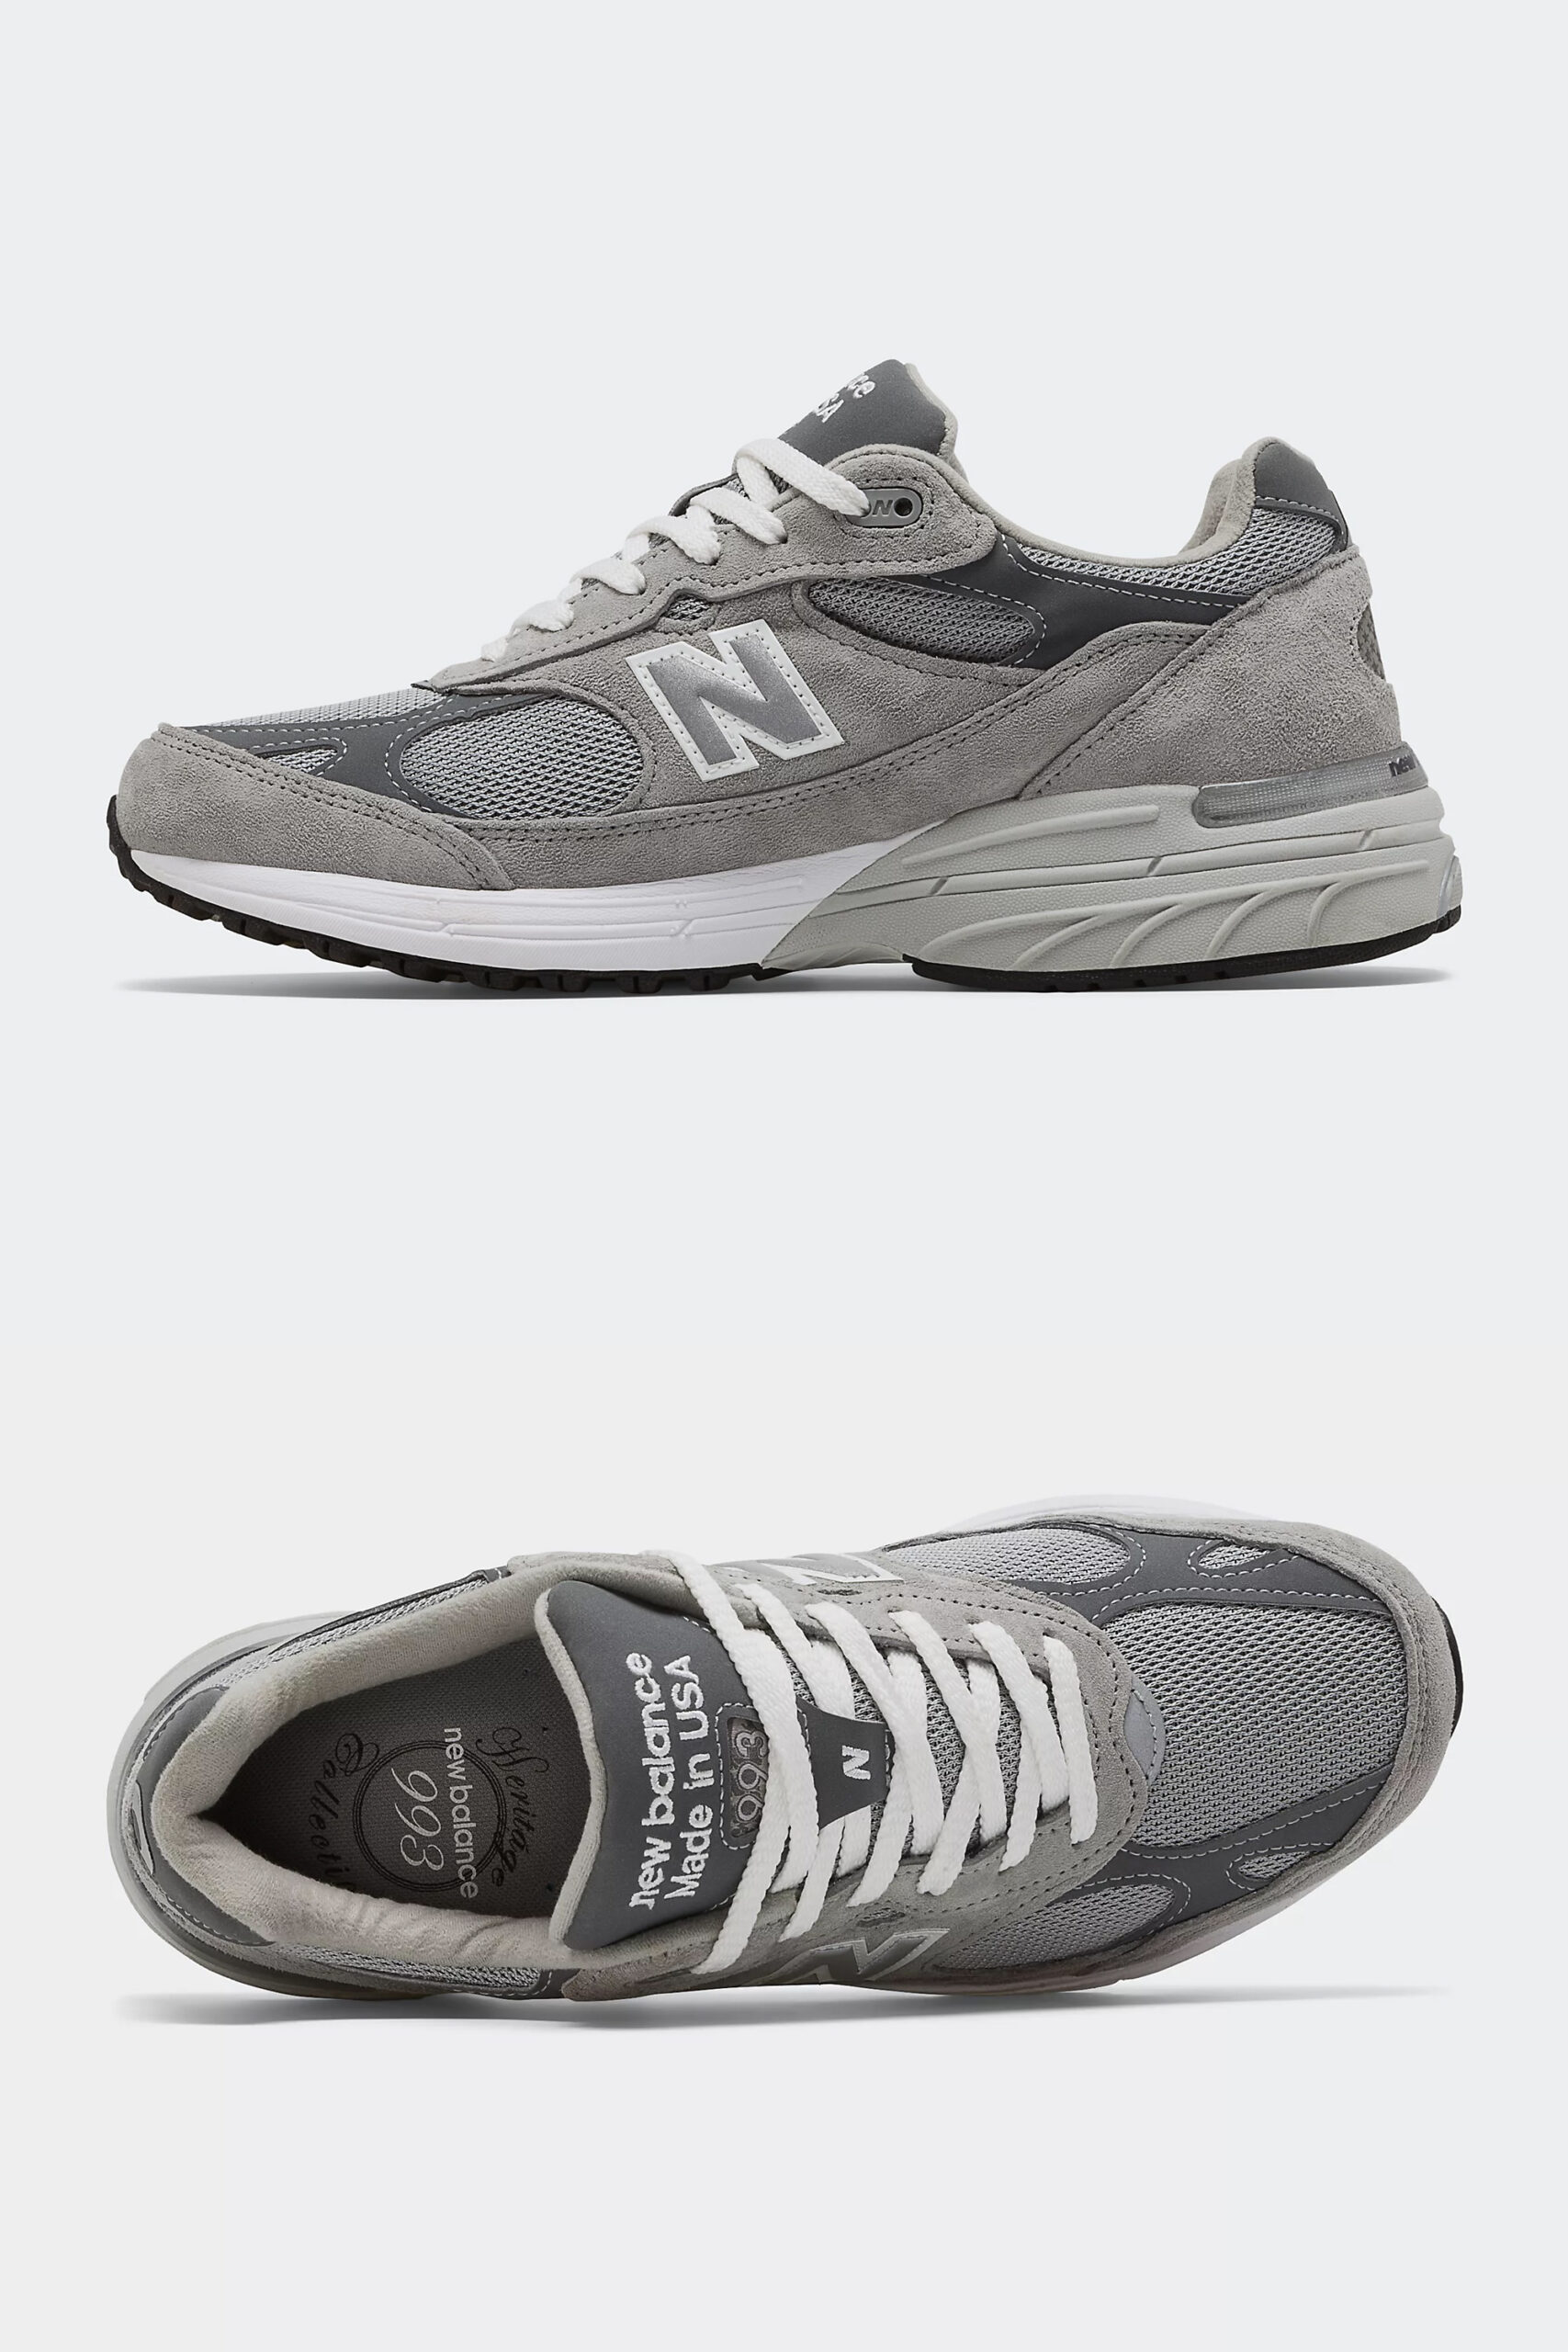 New Balance 993 Core – Grey Made in USA | sneakerb0b RELEASES